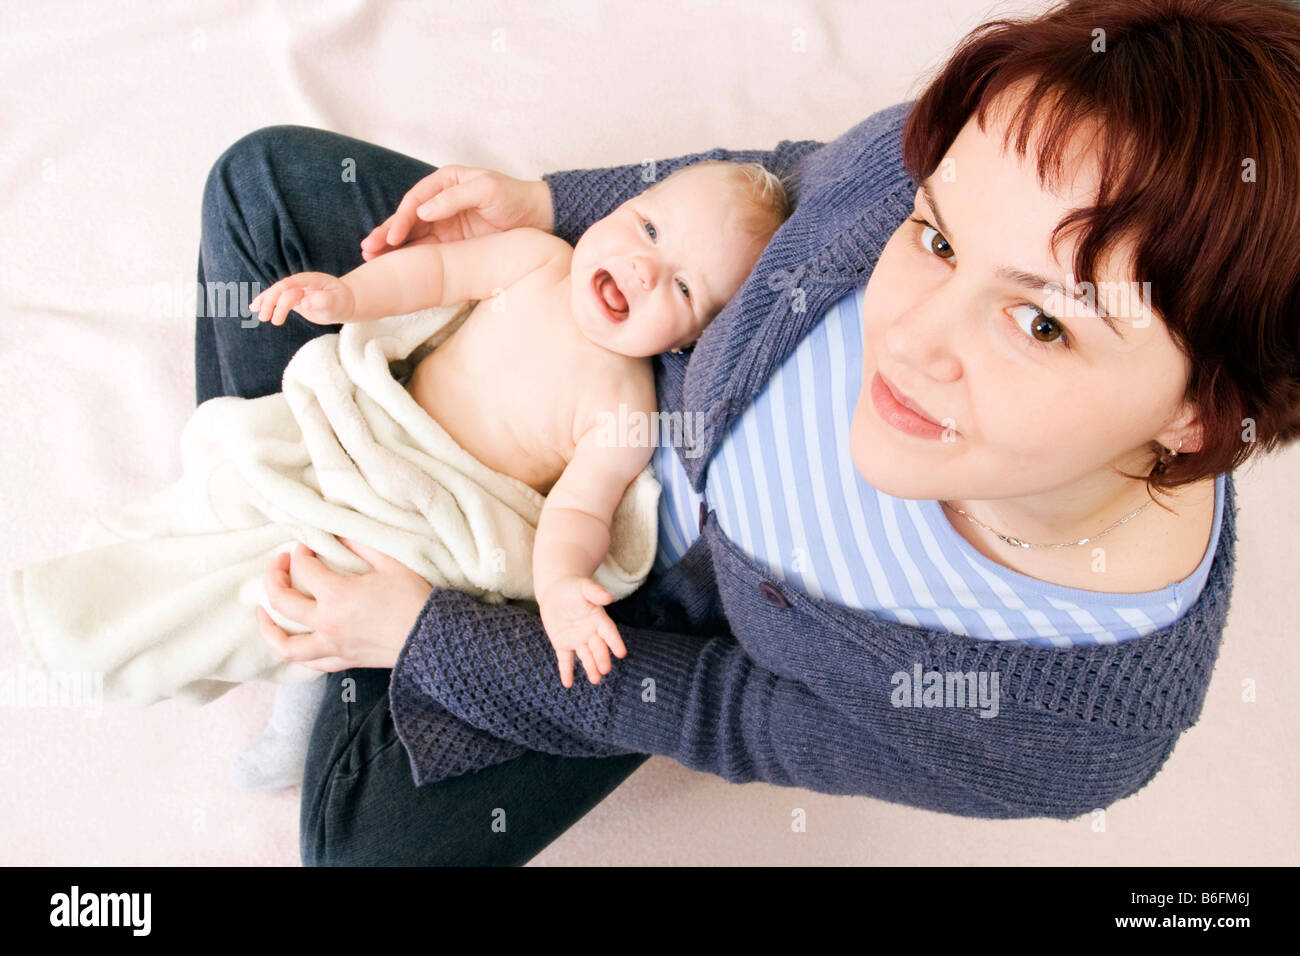 Baby, 7 months, with mother, 28 years Stock Photo